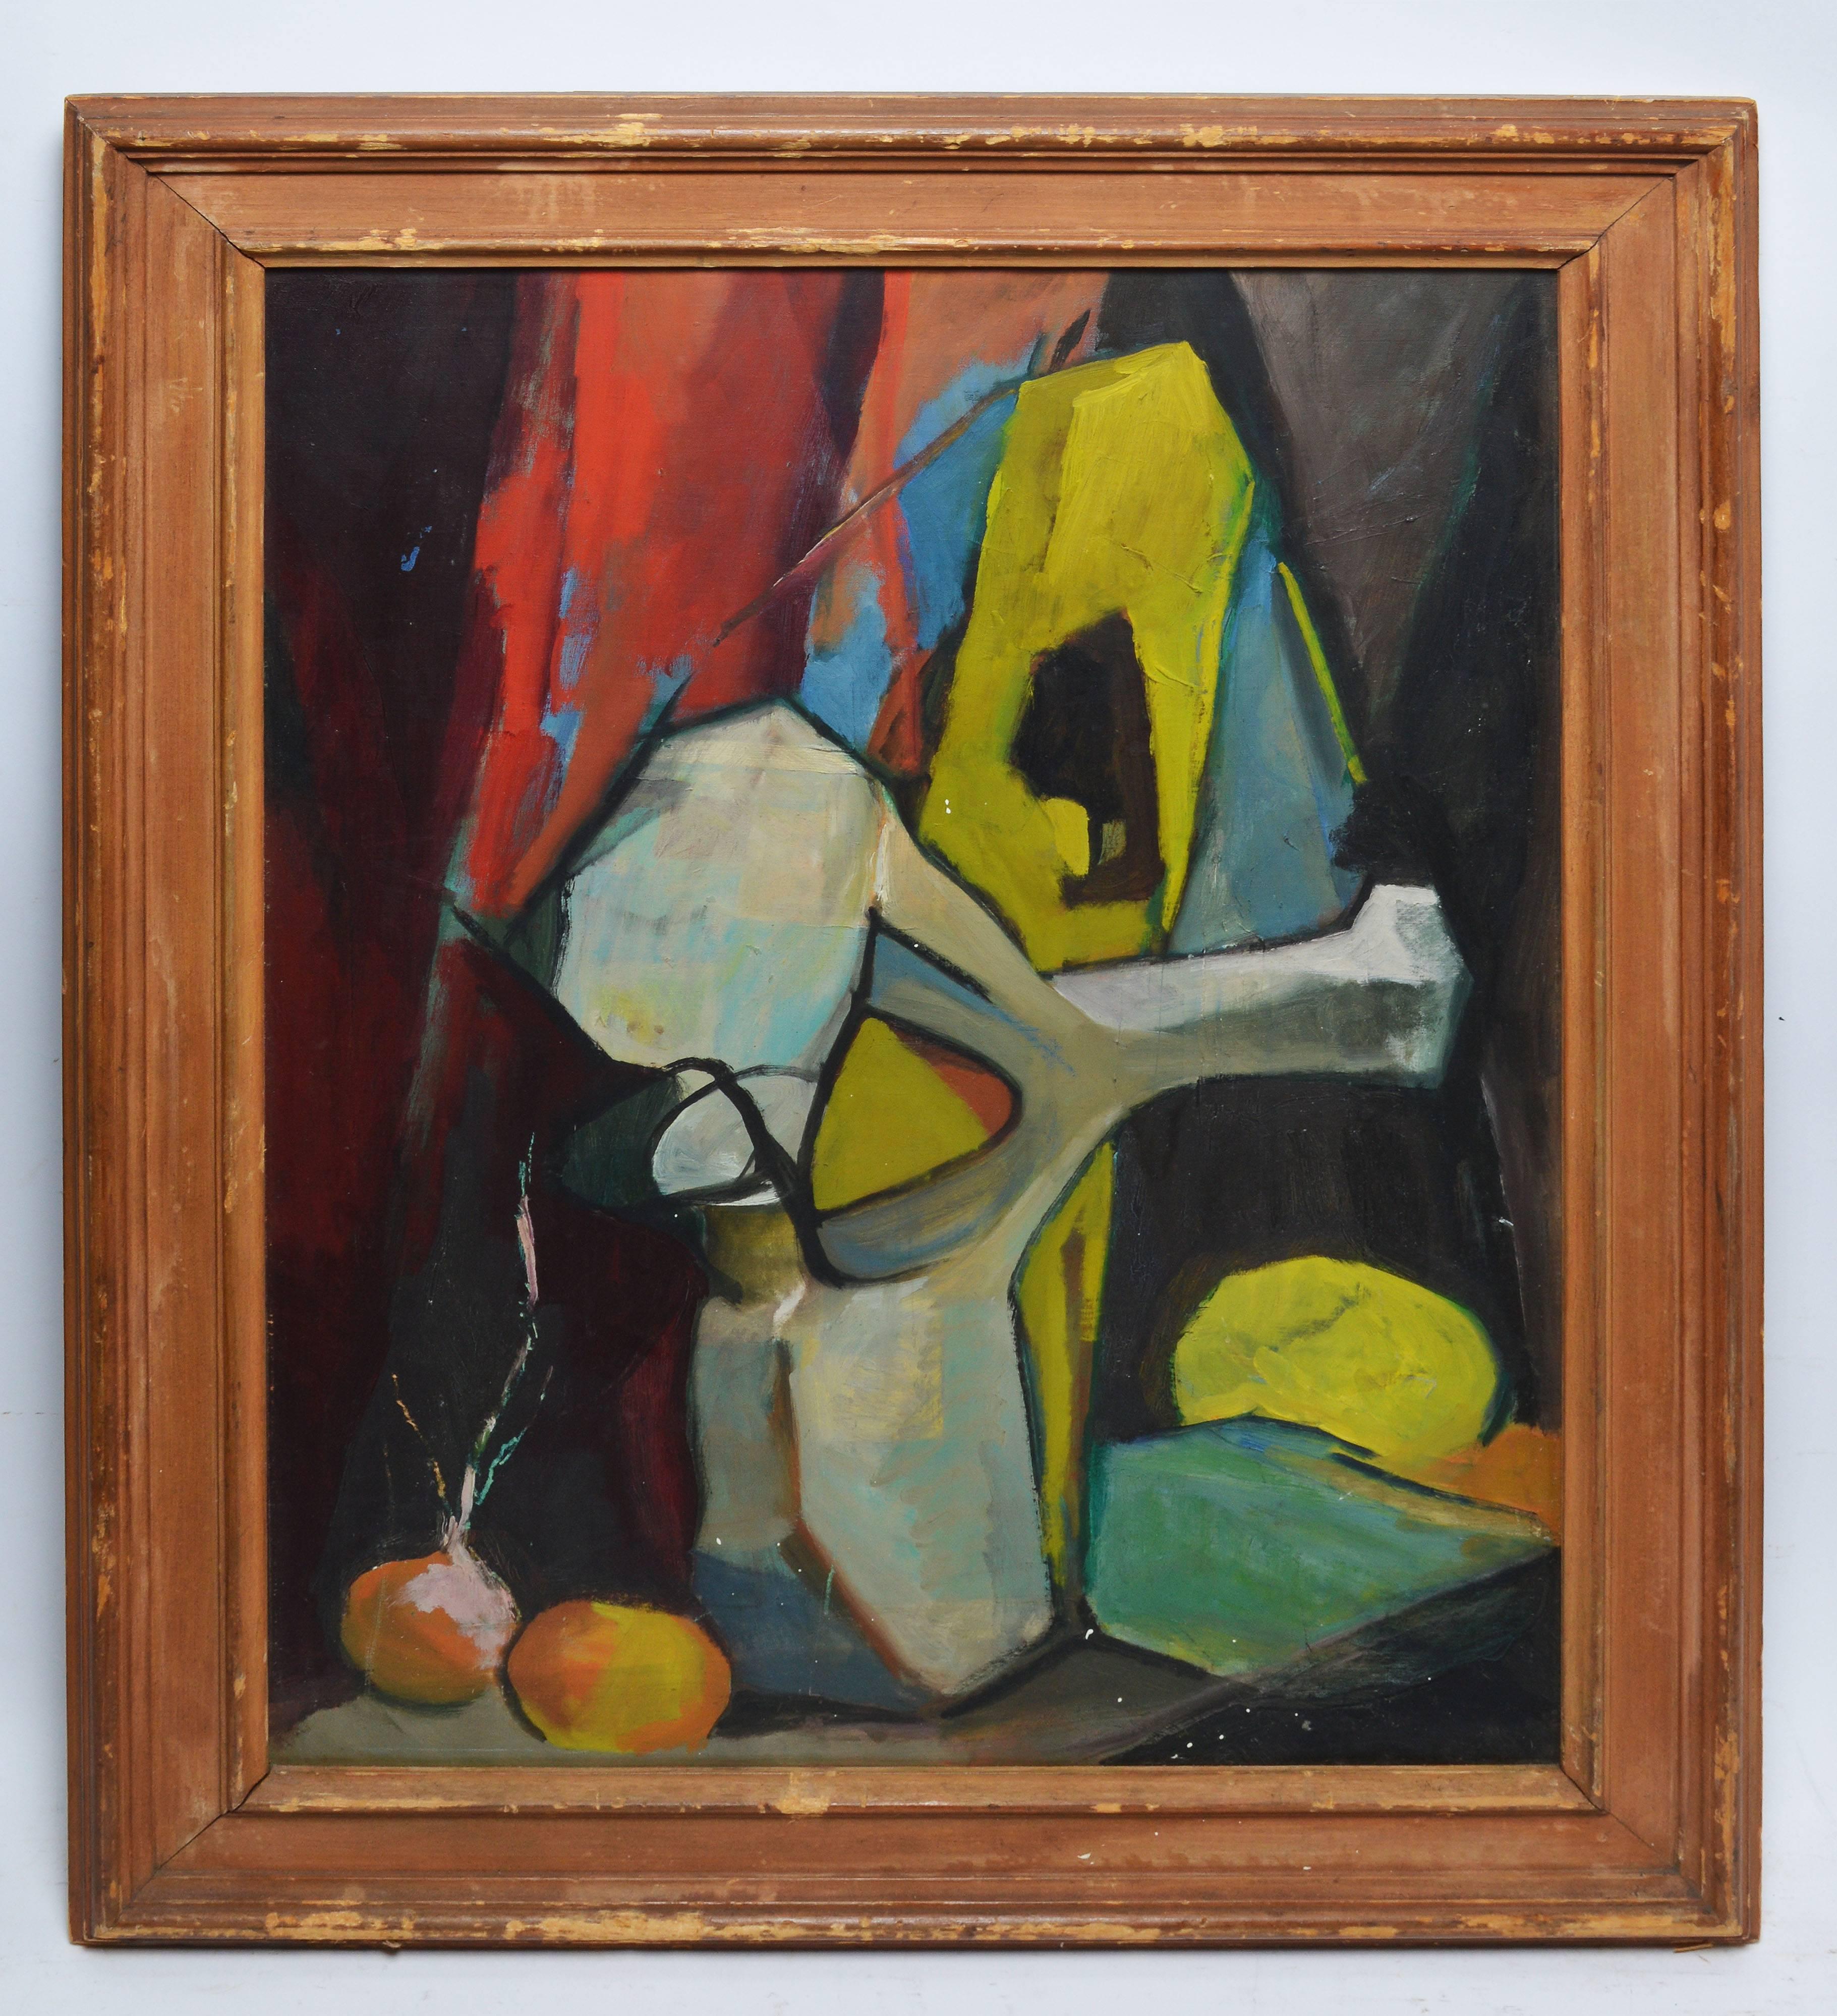 Early American Modernist Still Life - Painting by Unknown